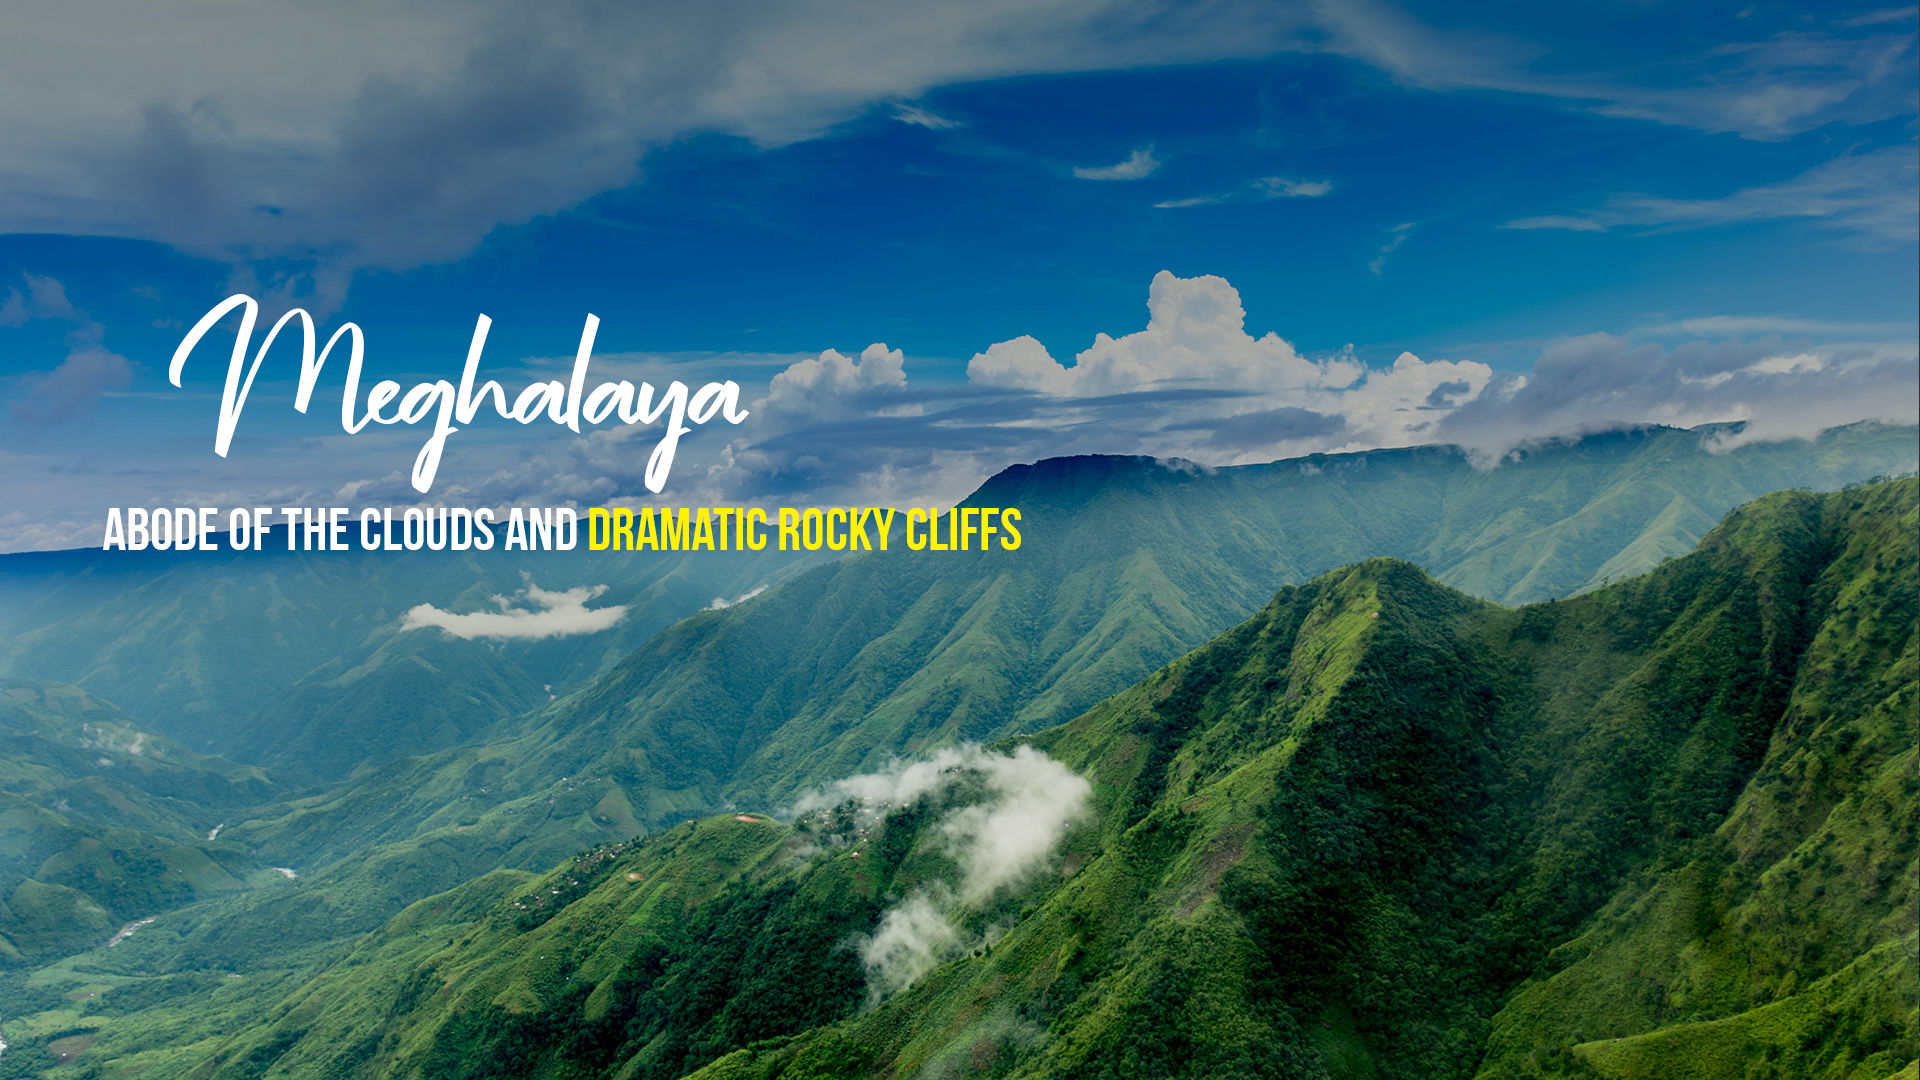 Meghalaya Tour packages : Book Meghalaya Tours and Holiday Packages